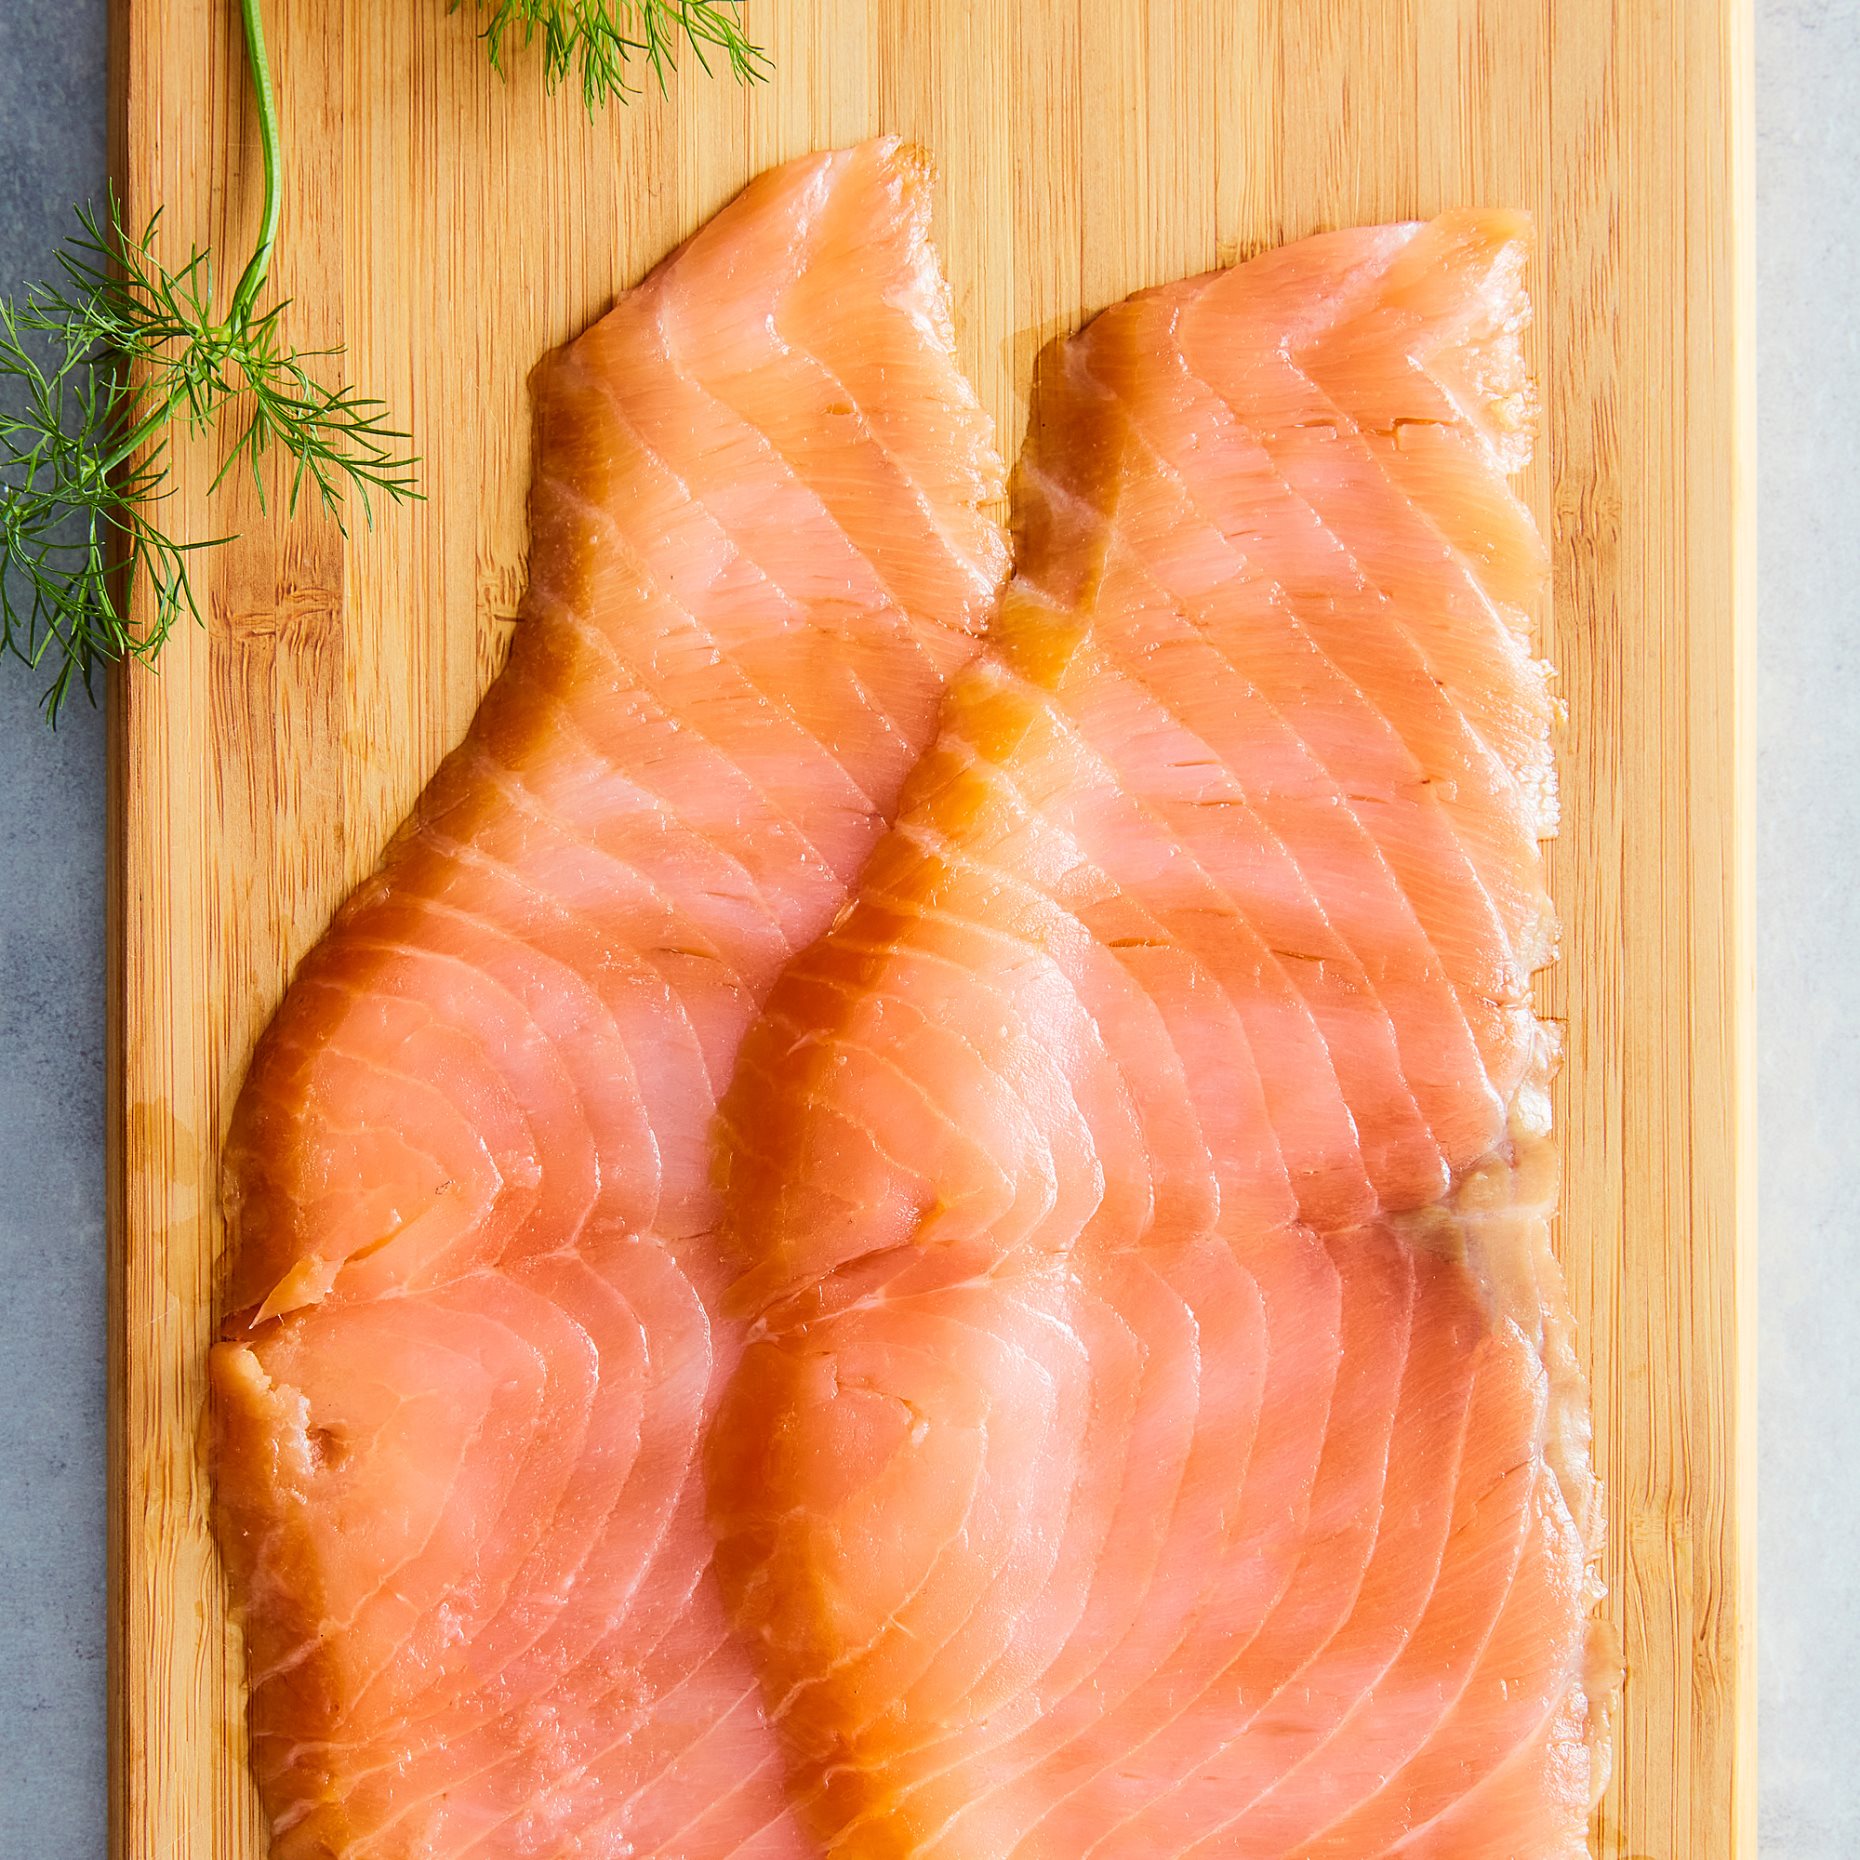 SJÖRAPPORT, cold smoked salmon ASC certified/frozen, 200 g, 803.600.22